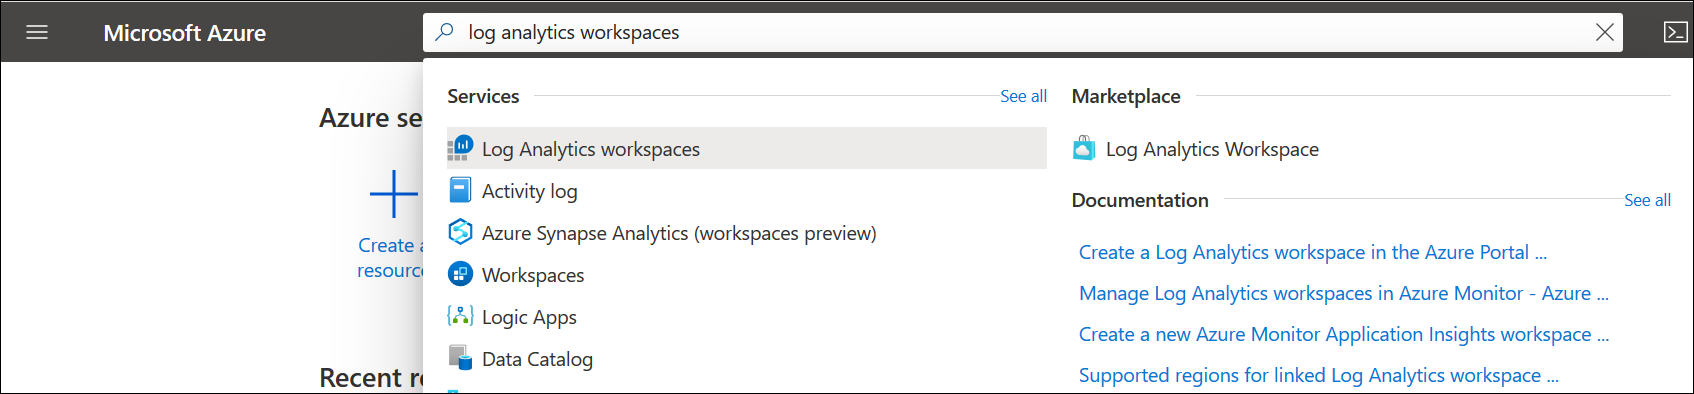 Screenshot that shows the search bar at the top of the Azure home screen. As you begin typing, the list of search results filters based on your input.